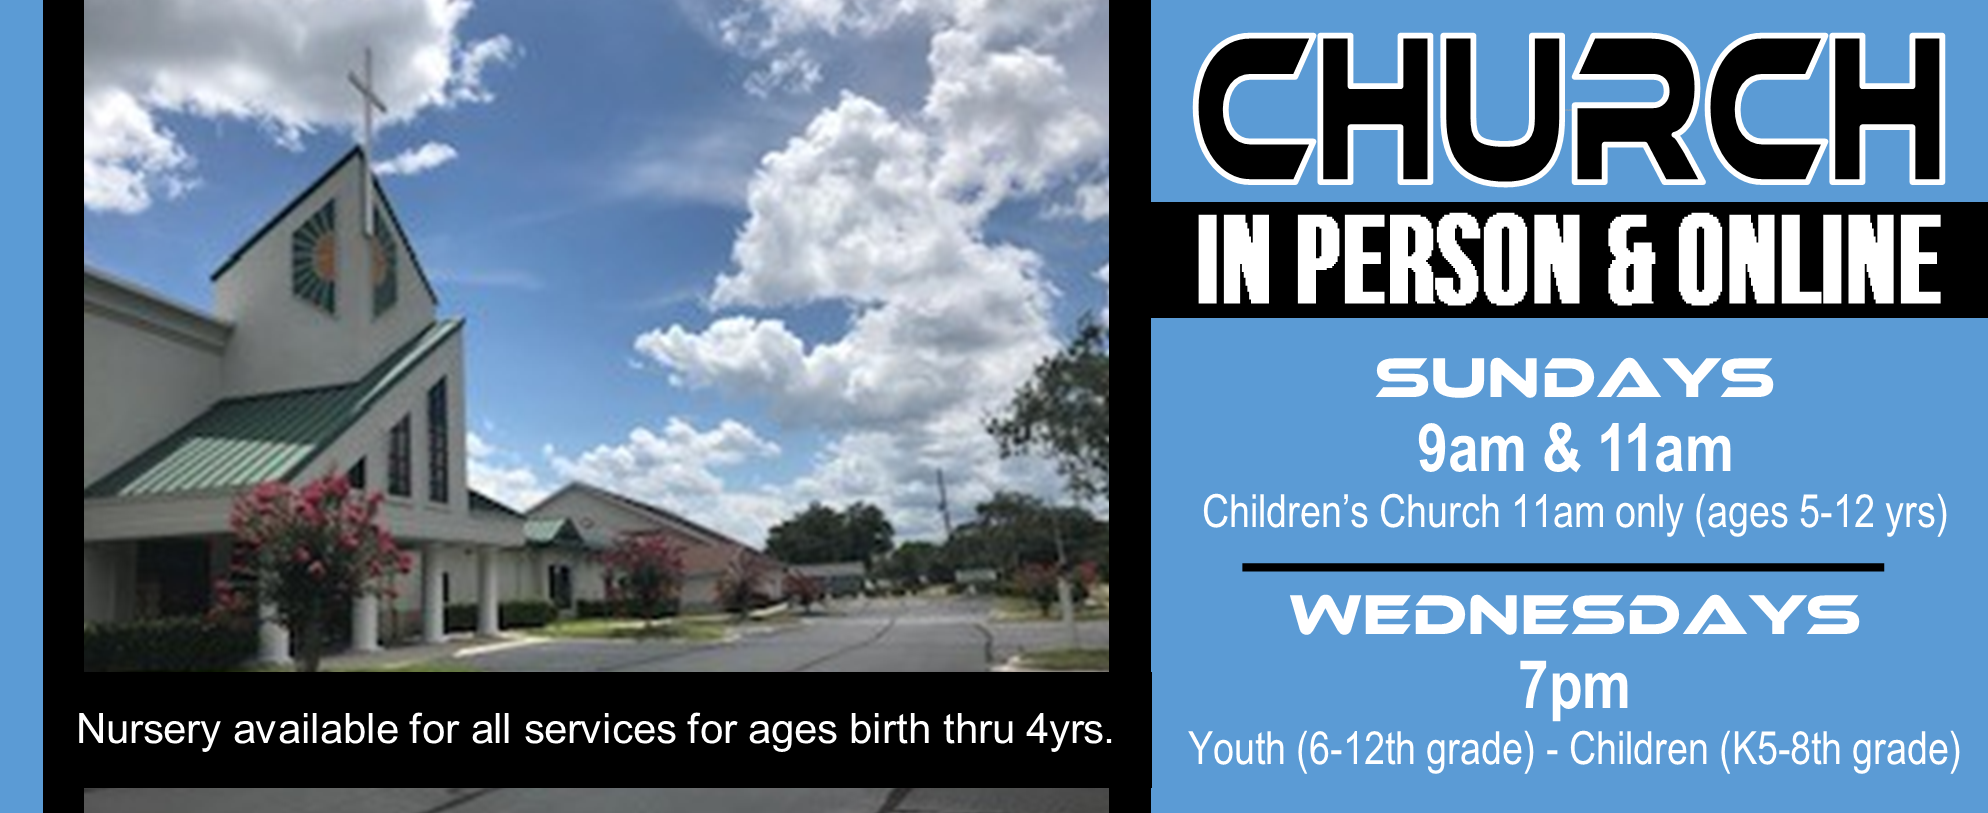 Church In Person & Online 9-19 & 22-21